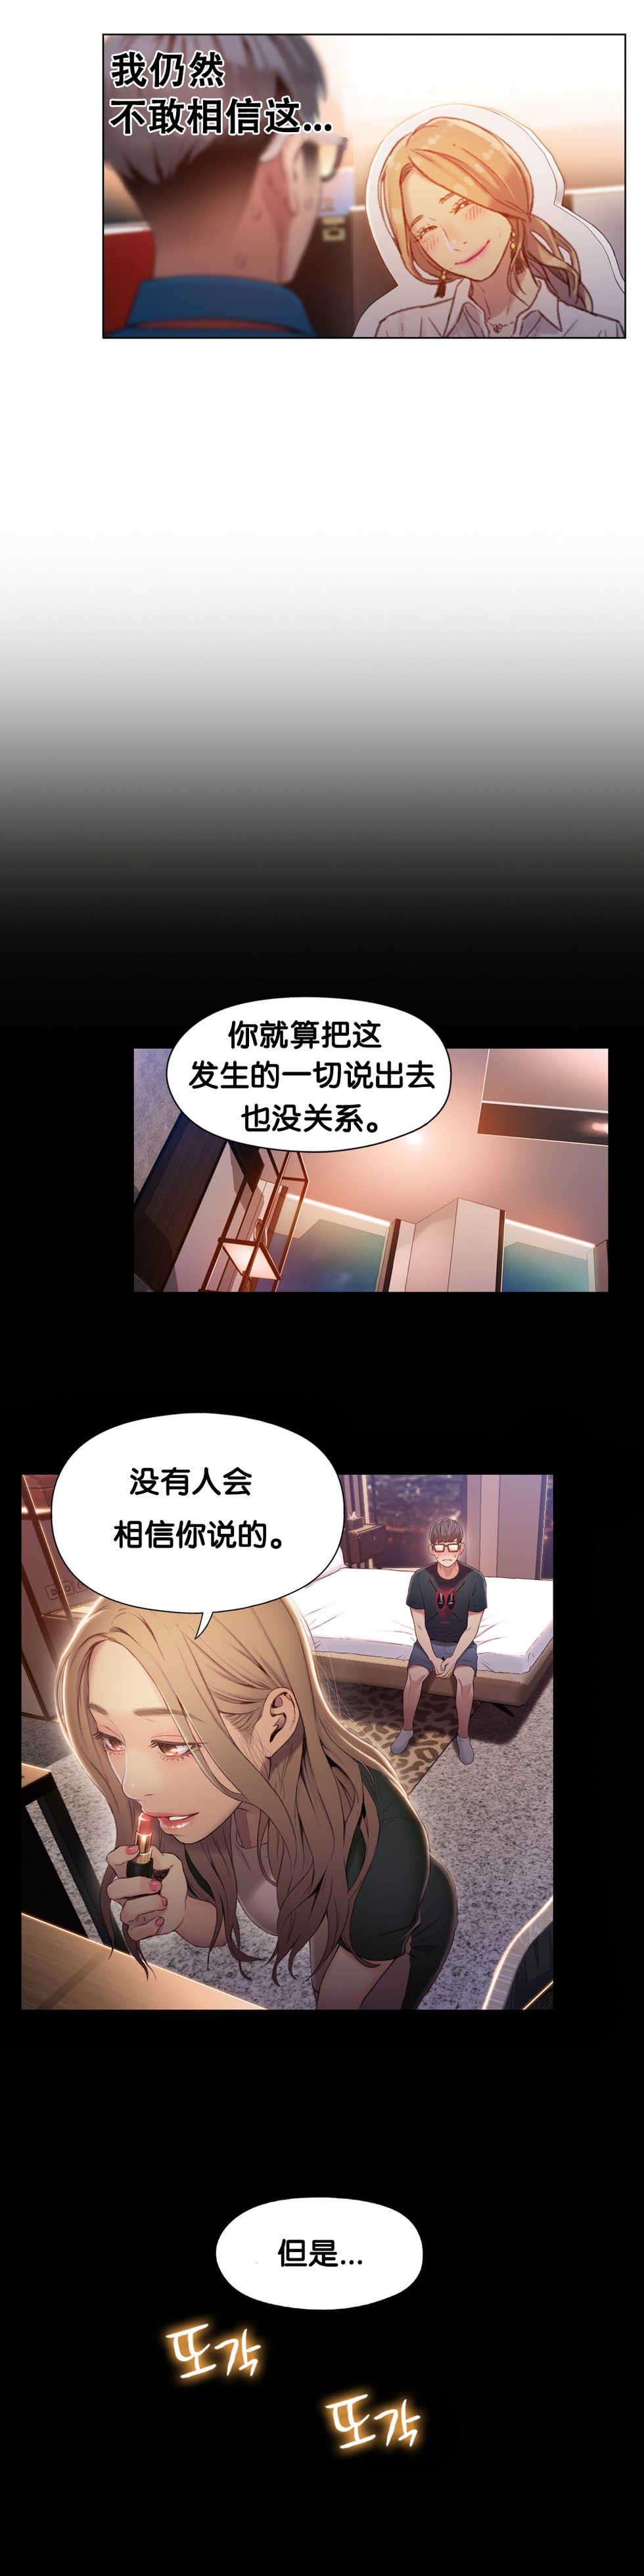 [BAK Hyeong Jun]Sweet Guy Ch.46-48(Chinese)(FITHRPG6) - Page 4